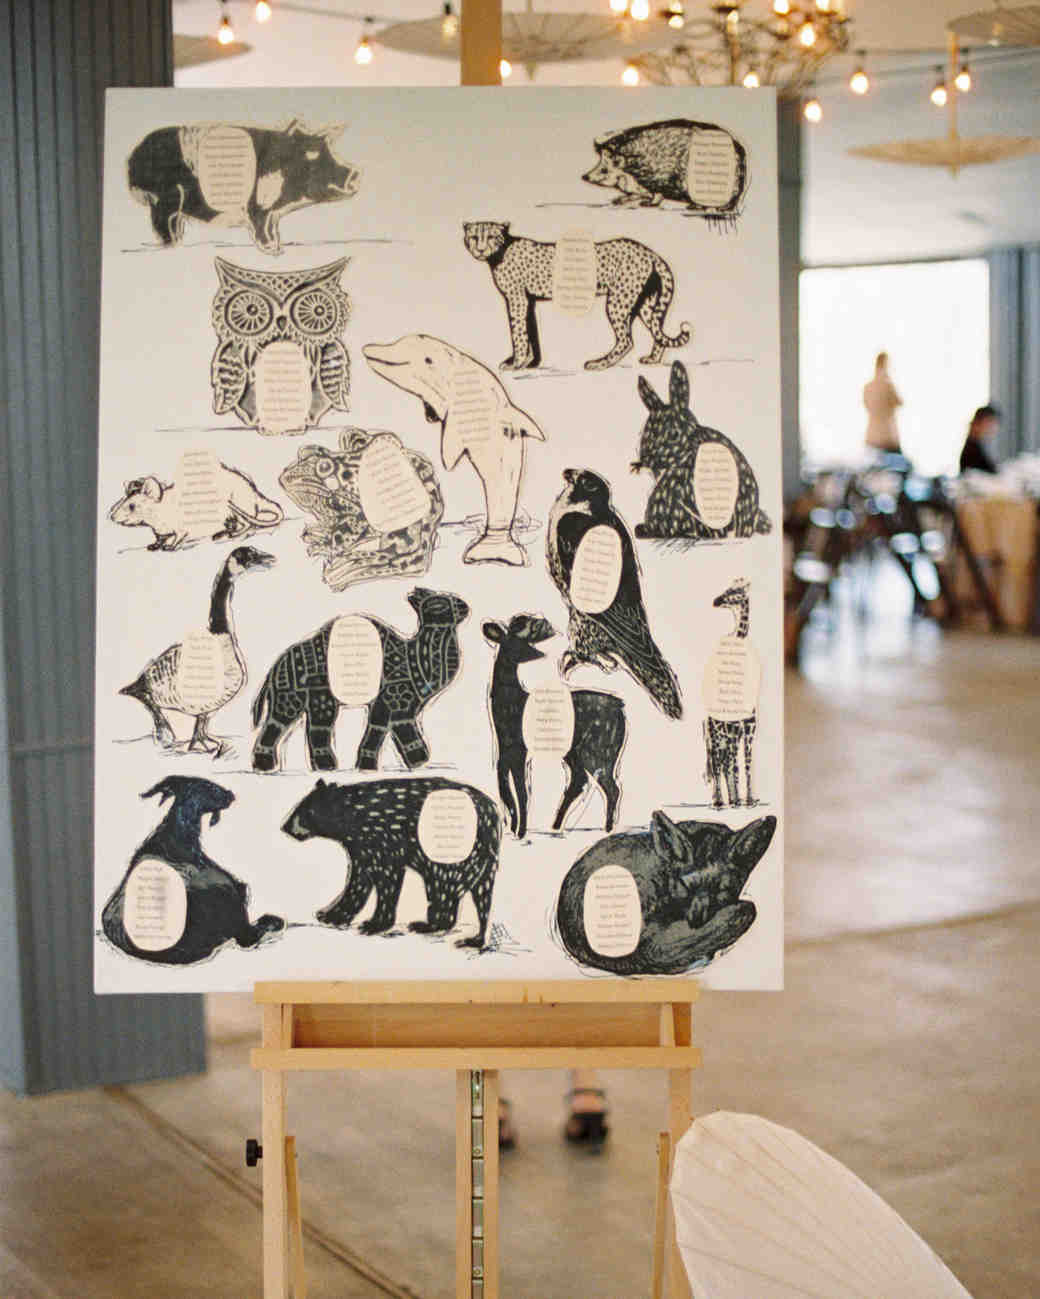 Animal Themed Seating Chart | 5 Creative Seating Arrangement Ideas | My Wedding Favors